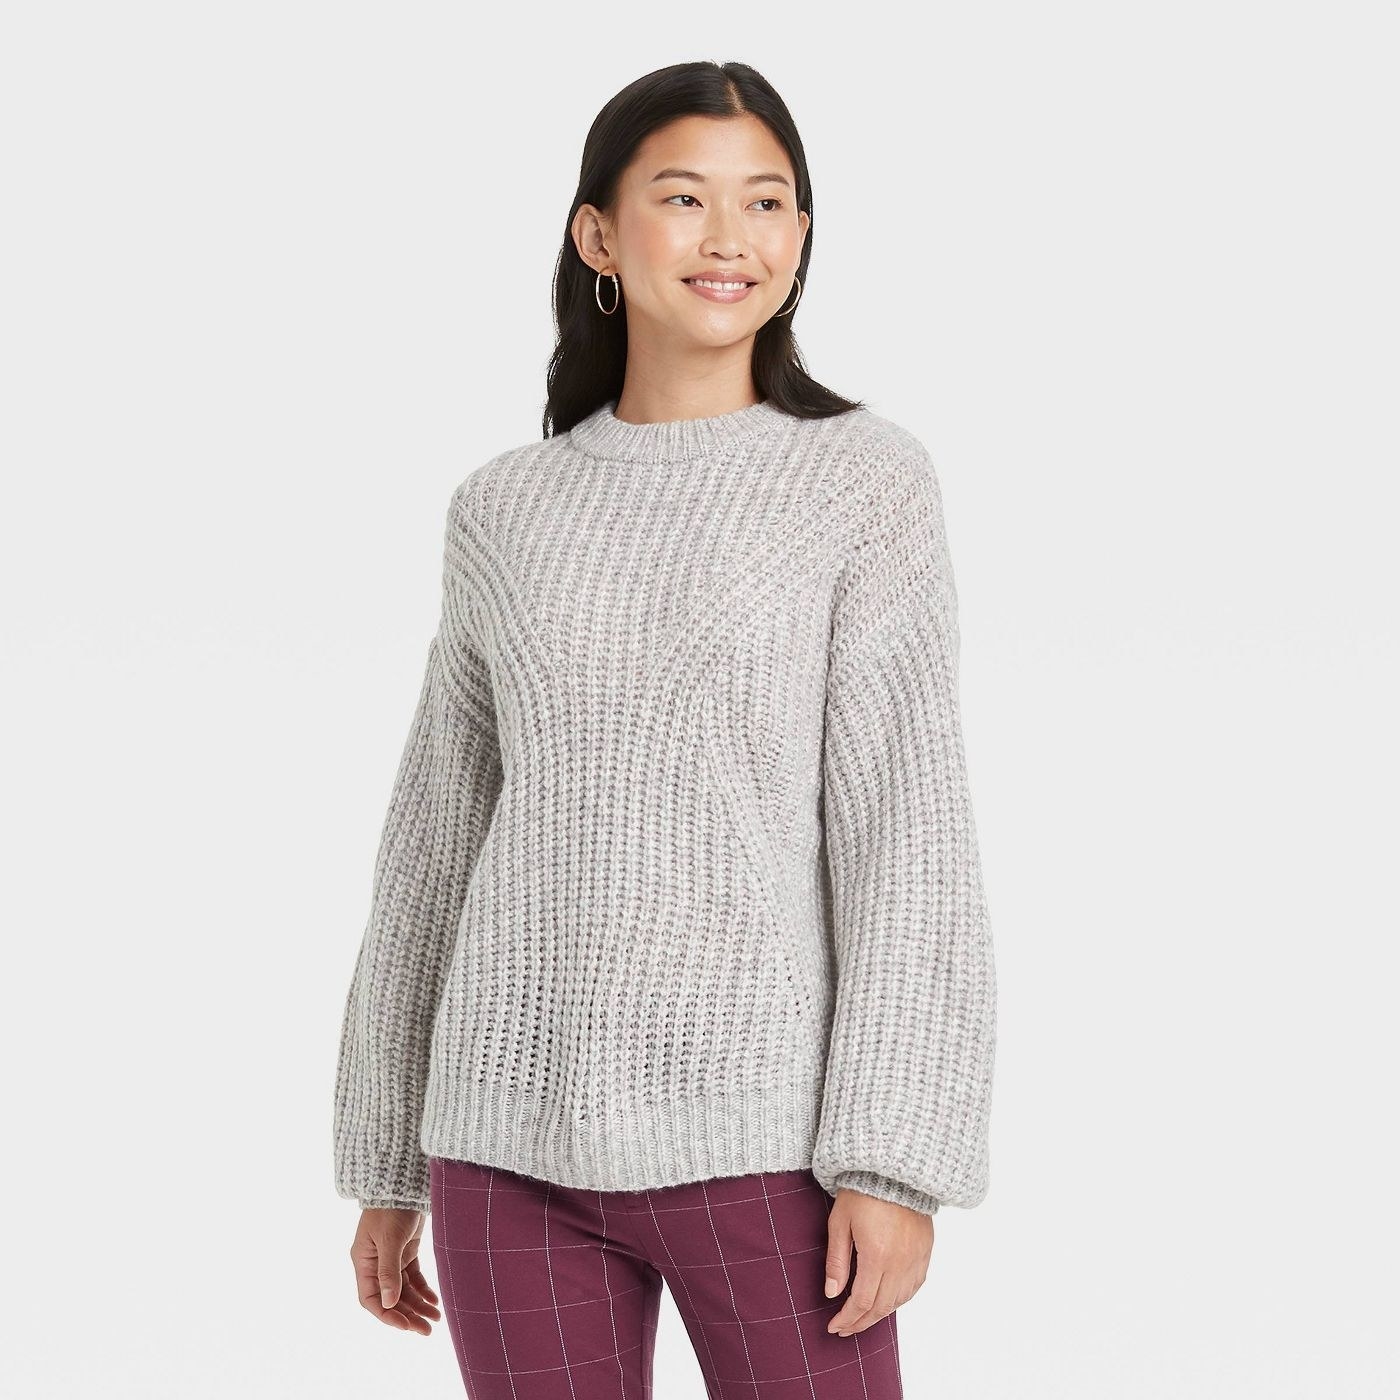 A grey pullover sweater